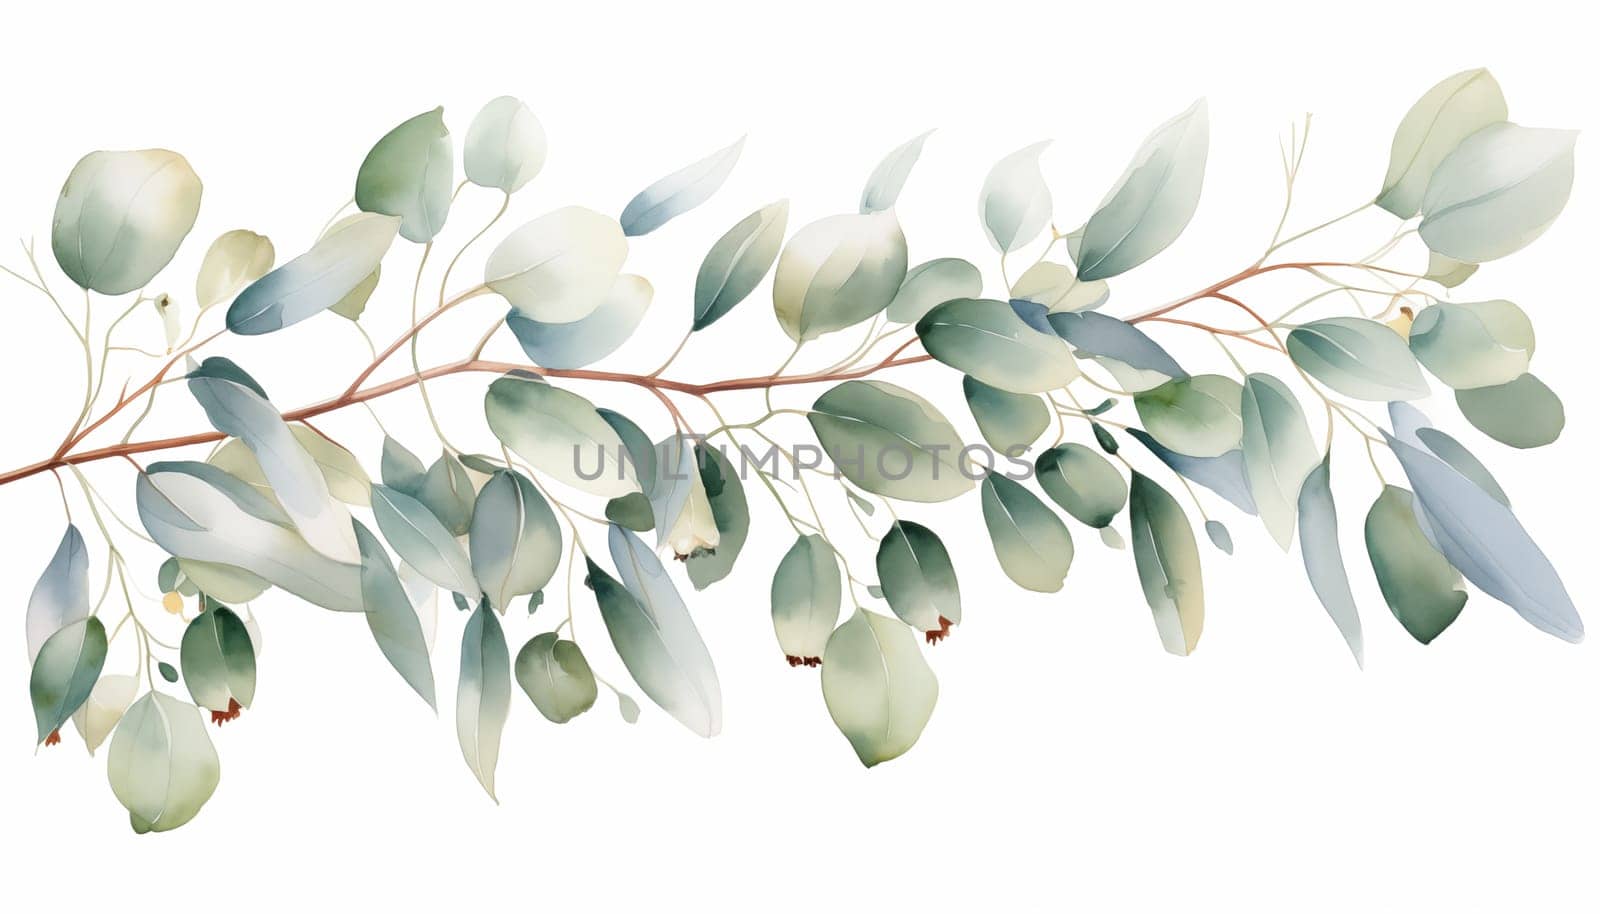 Watercolor Eucalyptus by Nadtochiy